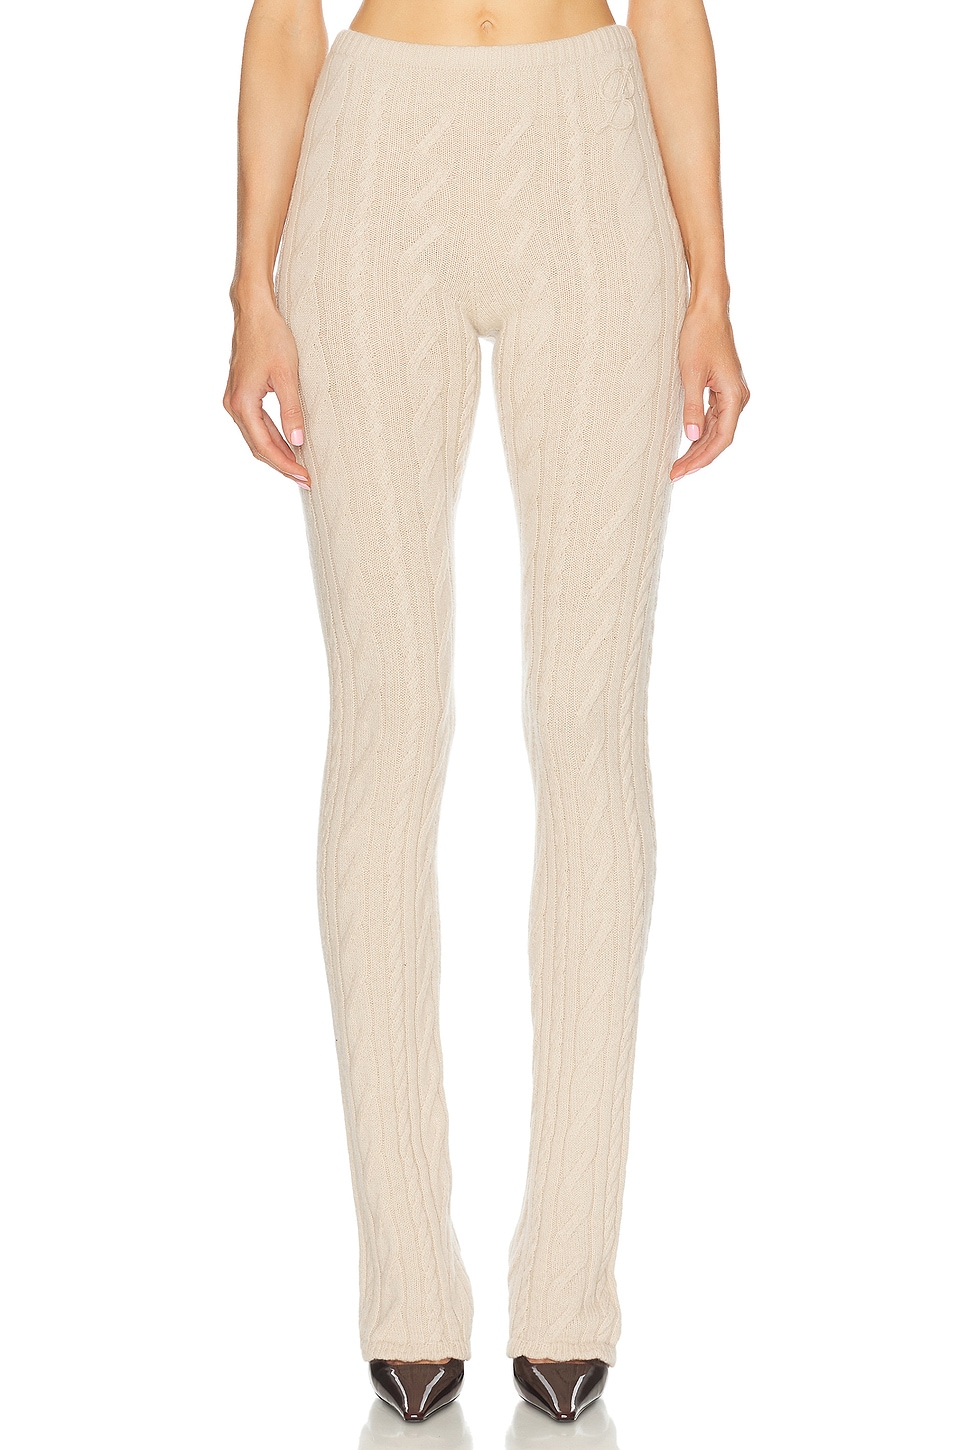 Image 1 of Blumarine Knit Pant in Croissant